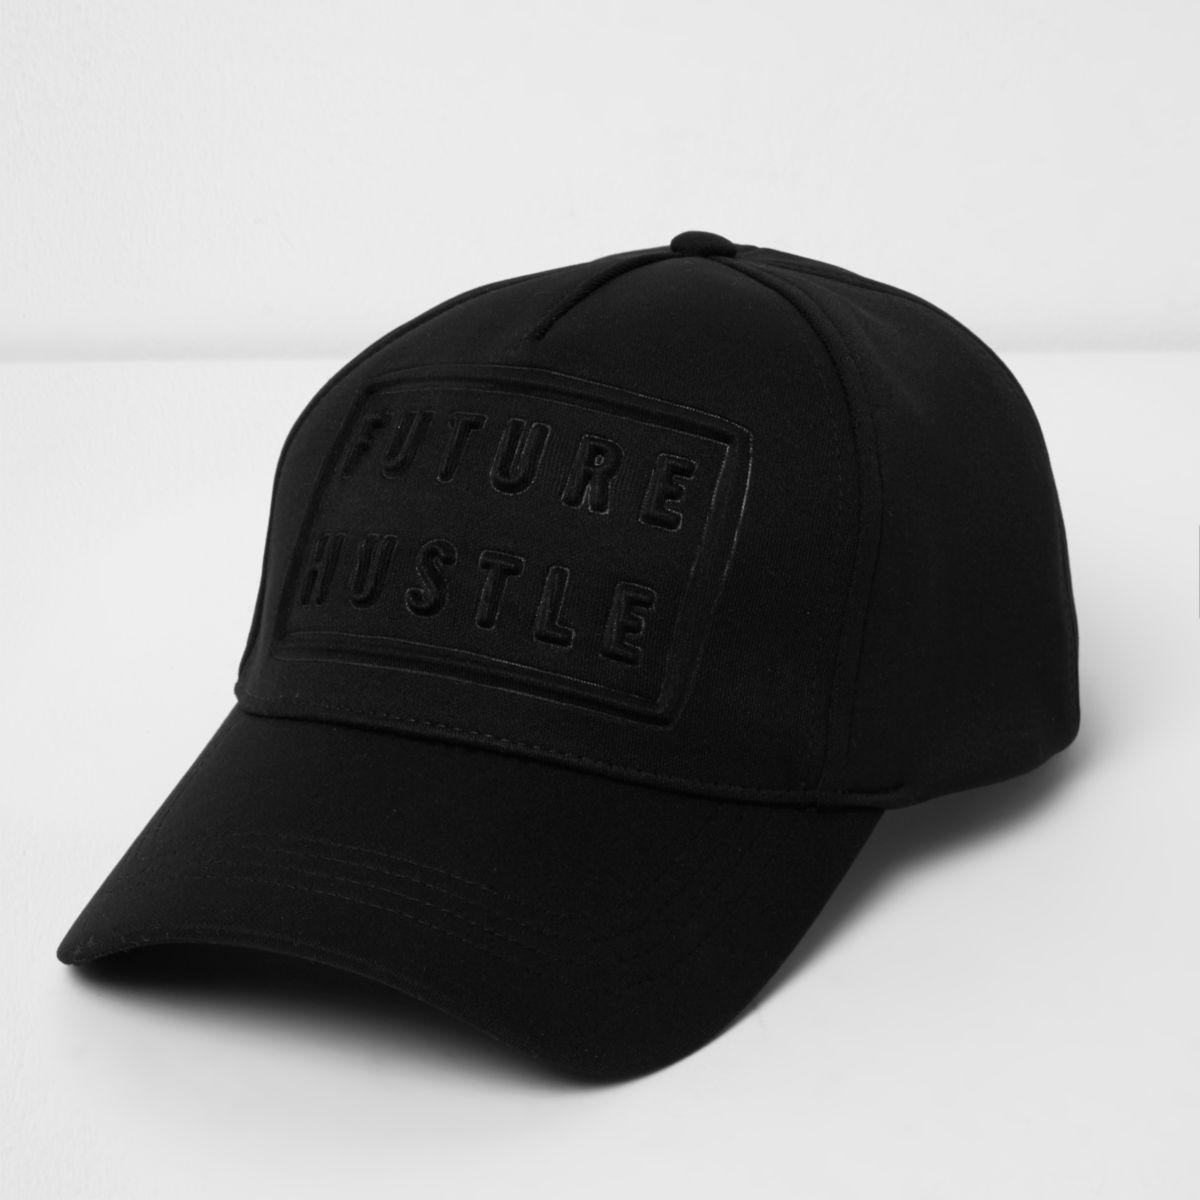 River Island Synthetic Future Hustle Cap in Black for Men - Lyst